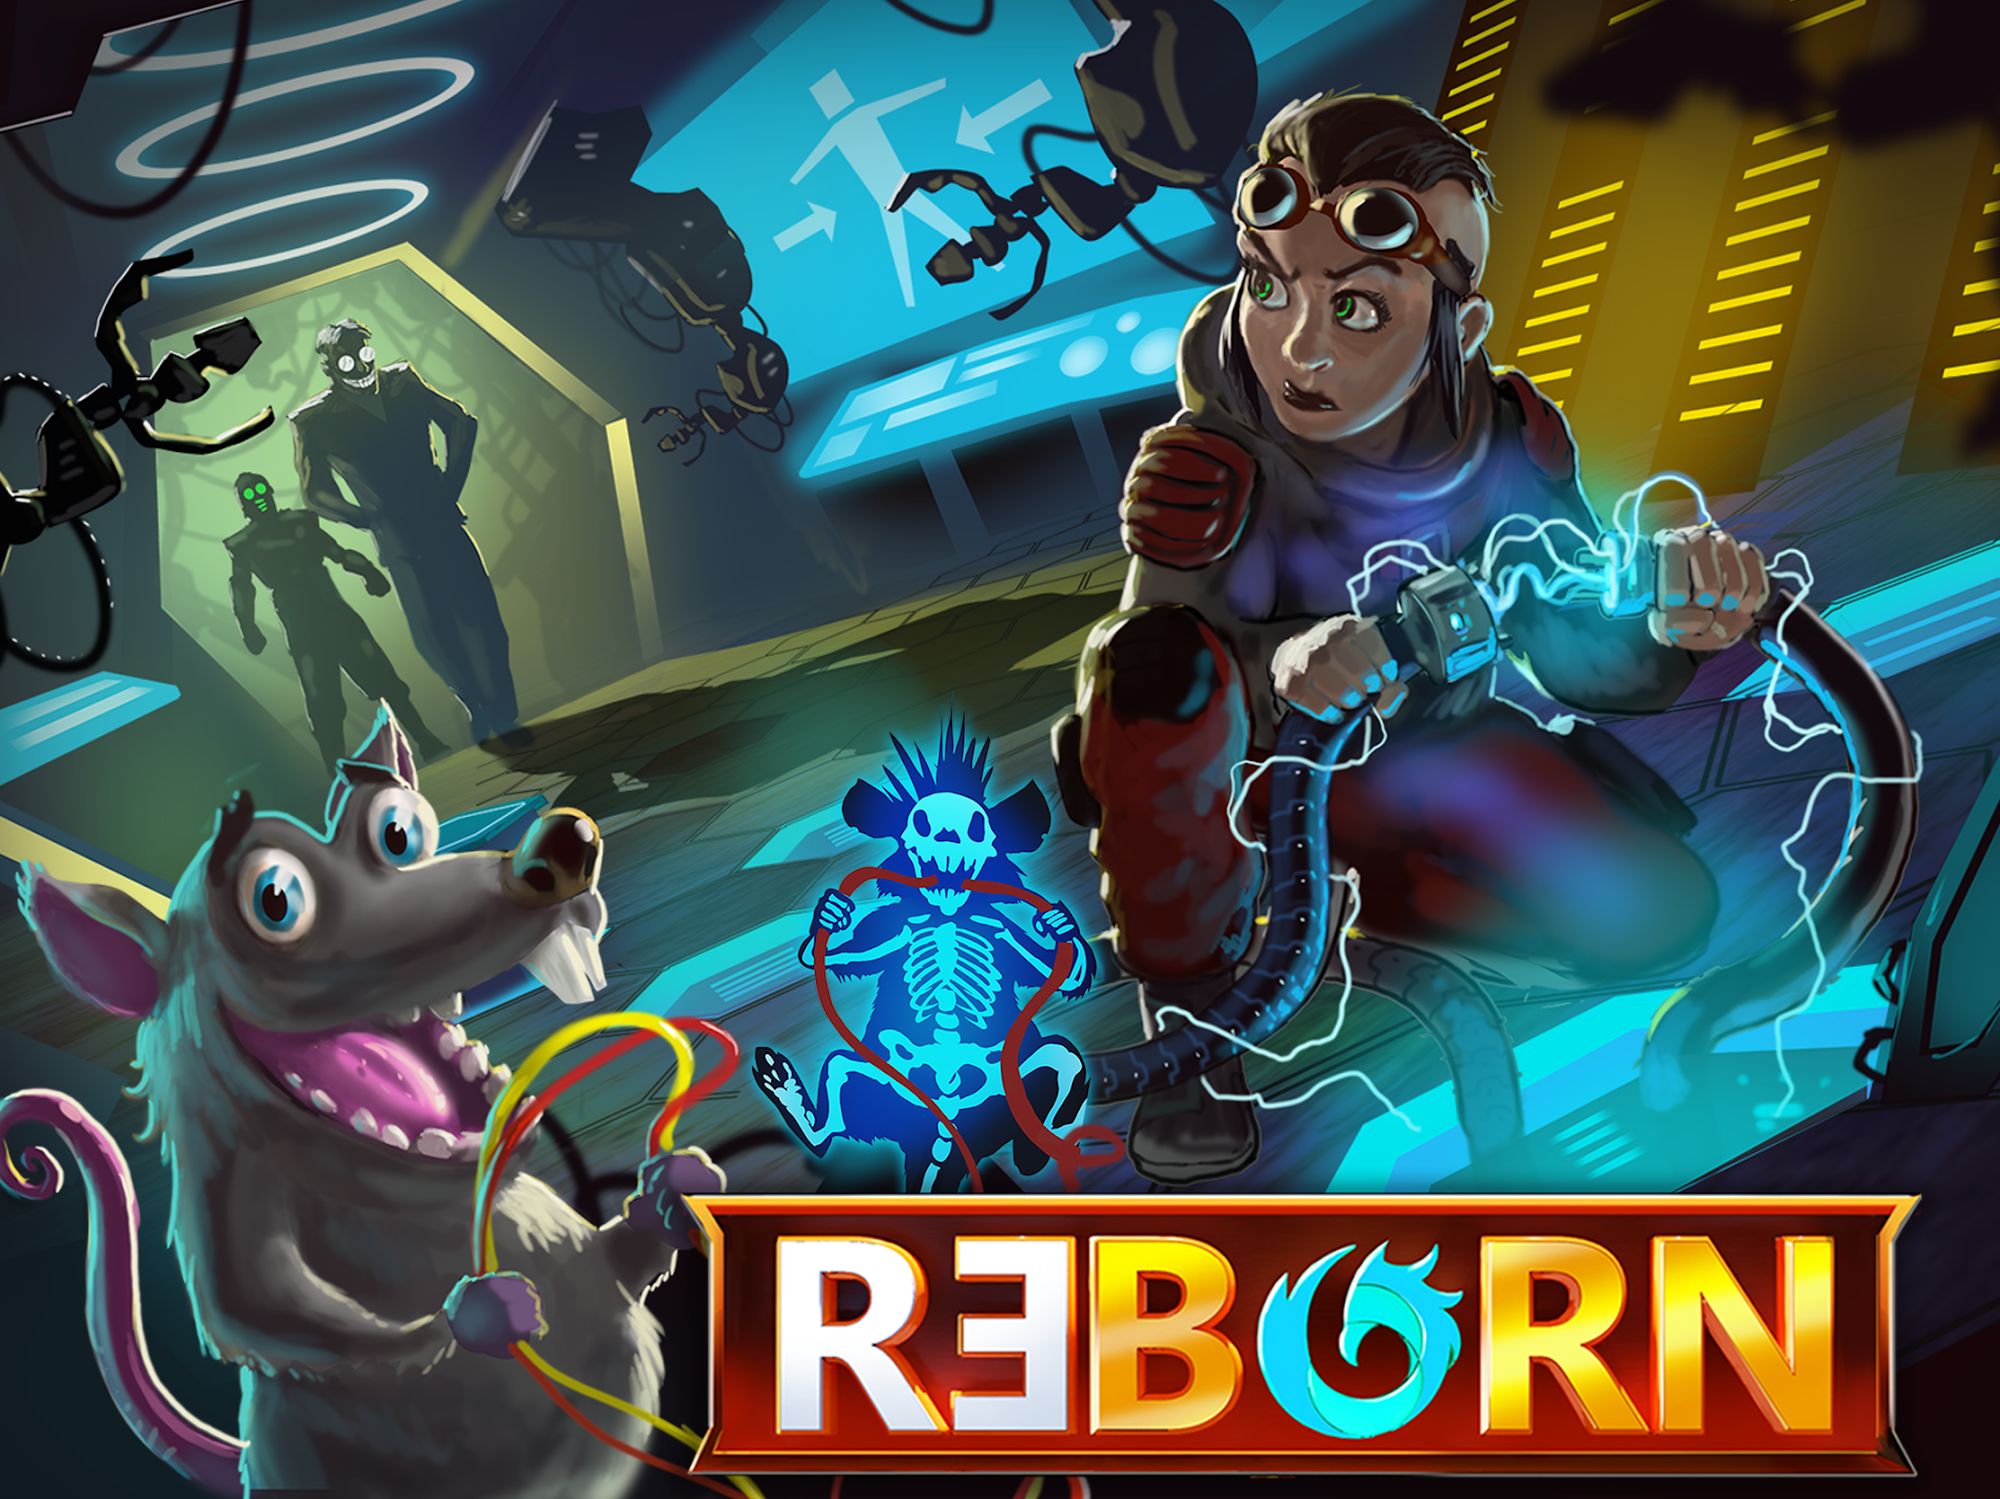 Baixar Adventure Reborn: story game point and click para Android grátis.